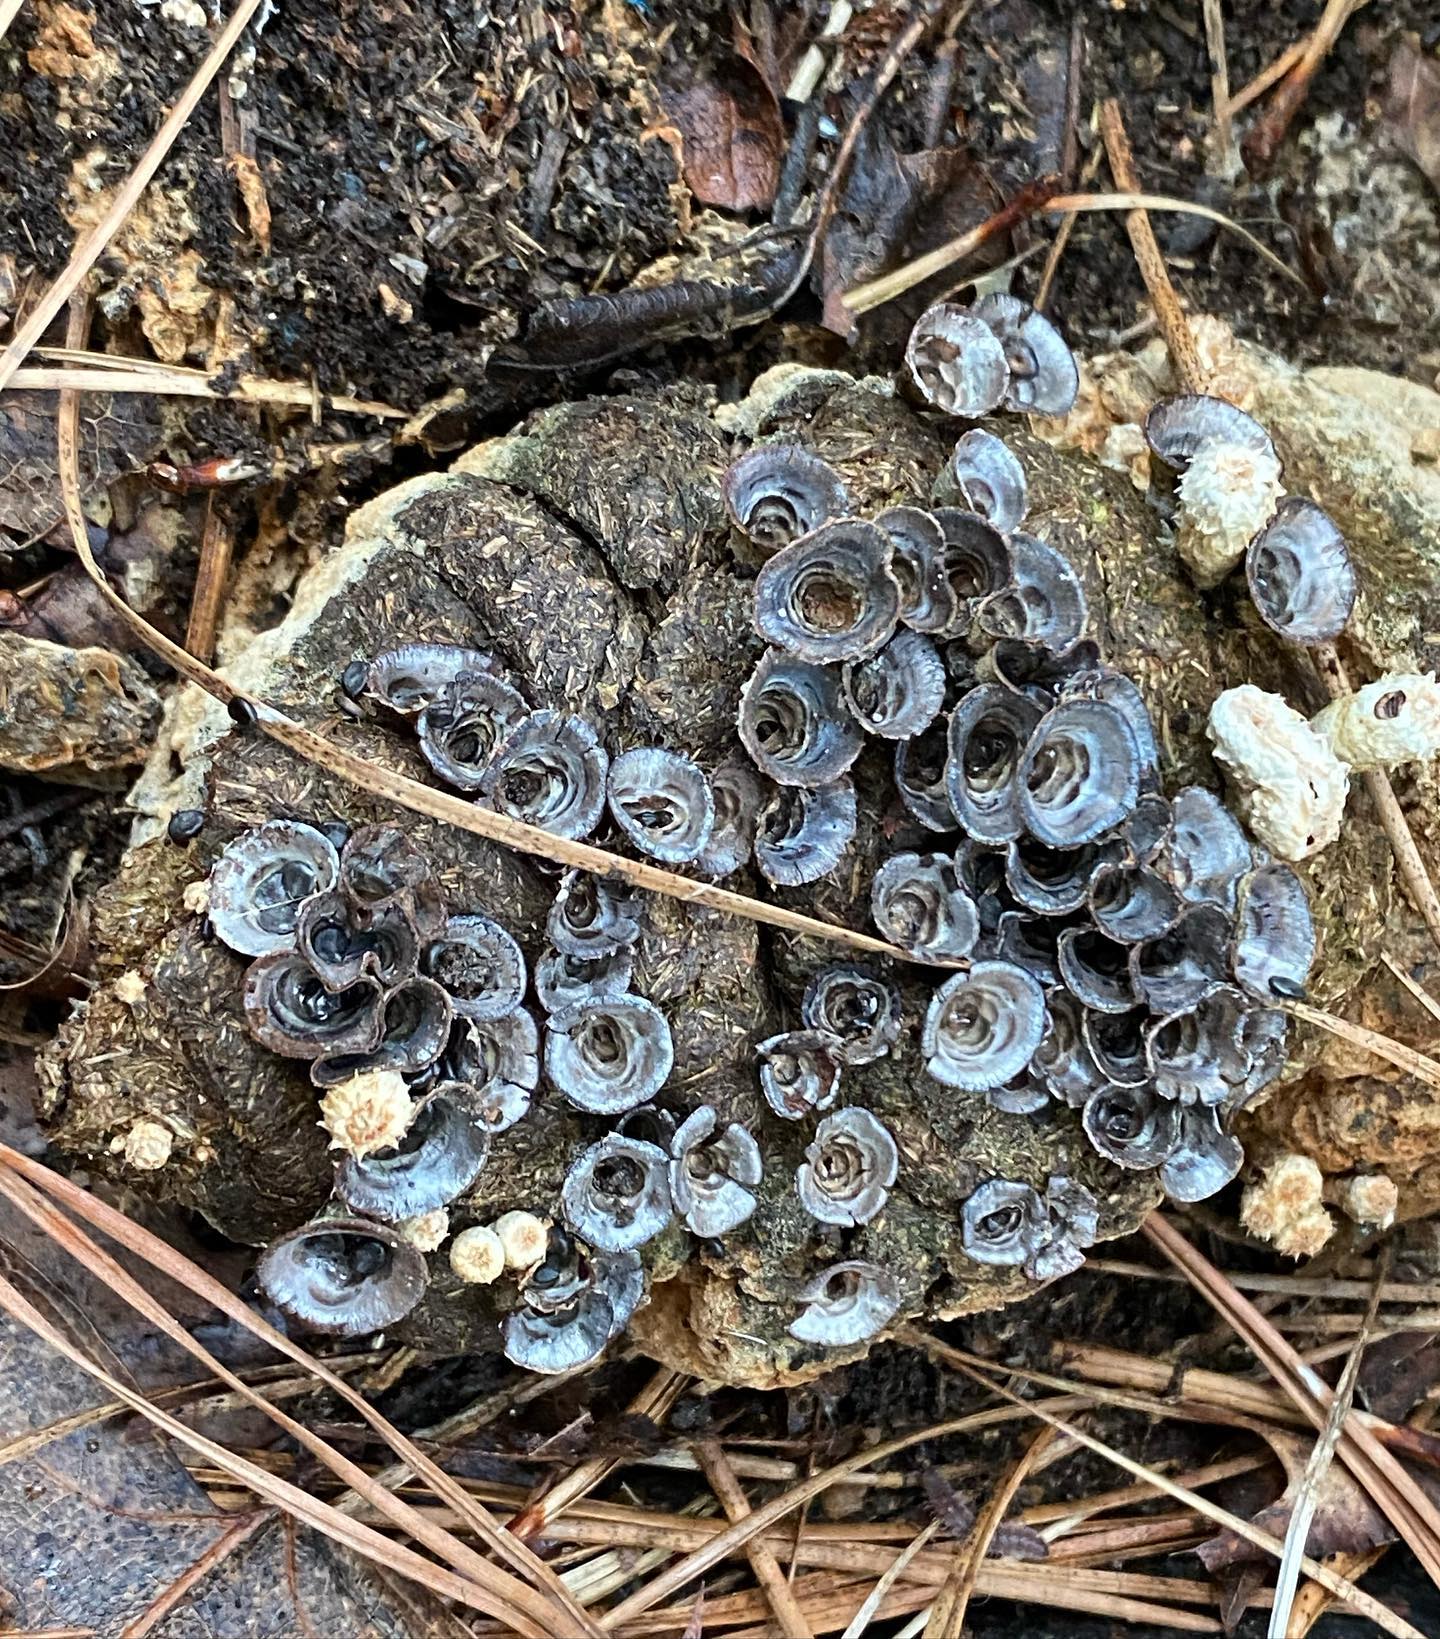 My first time finding bird’s nest fungus!!!! This specimen was dried out so I didn’t get to observe the “eggs”.
Lol, do you know what this fungus typically grows on? It’s a saprophyte, so naturally it consumes dead wood , decaying plant matter…. But I wasn’t expecting 💩! Ha! Well, I sure didn’t and I was shocked when I realized I was holding a piece of desiccated 💩 in my hand with mushrooms growing on it. I guess I shouldn’t be too surprised, as this was found in the pasture but yes, a quick little google search proved that it loves to grow on 💩.
🤣💩🍄😆💩🍄😂